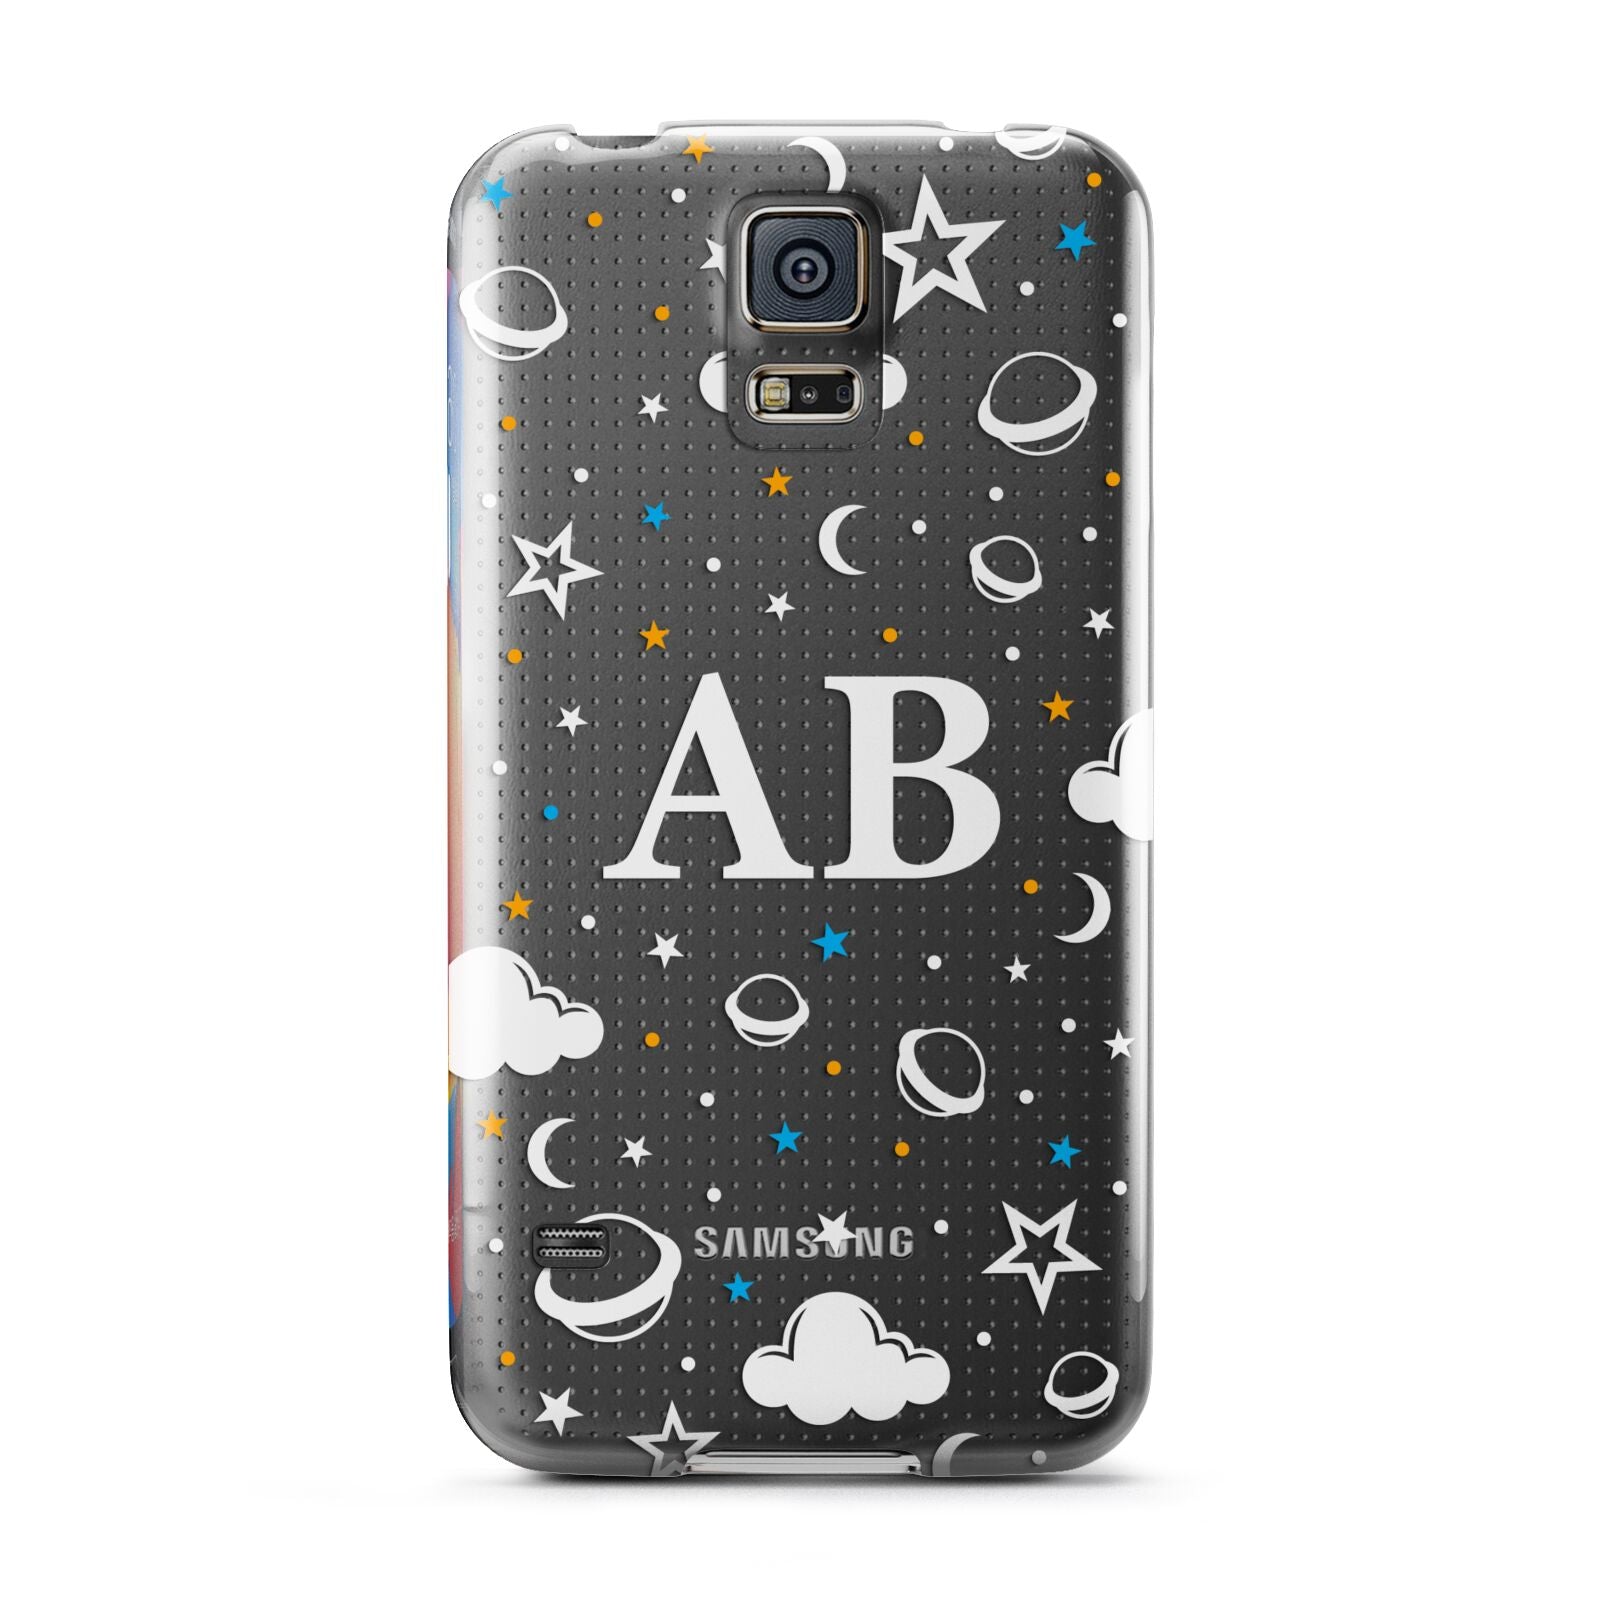 Astronomical Initials Samsung Galaxy S5 Case